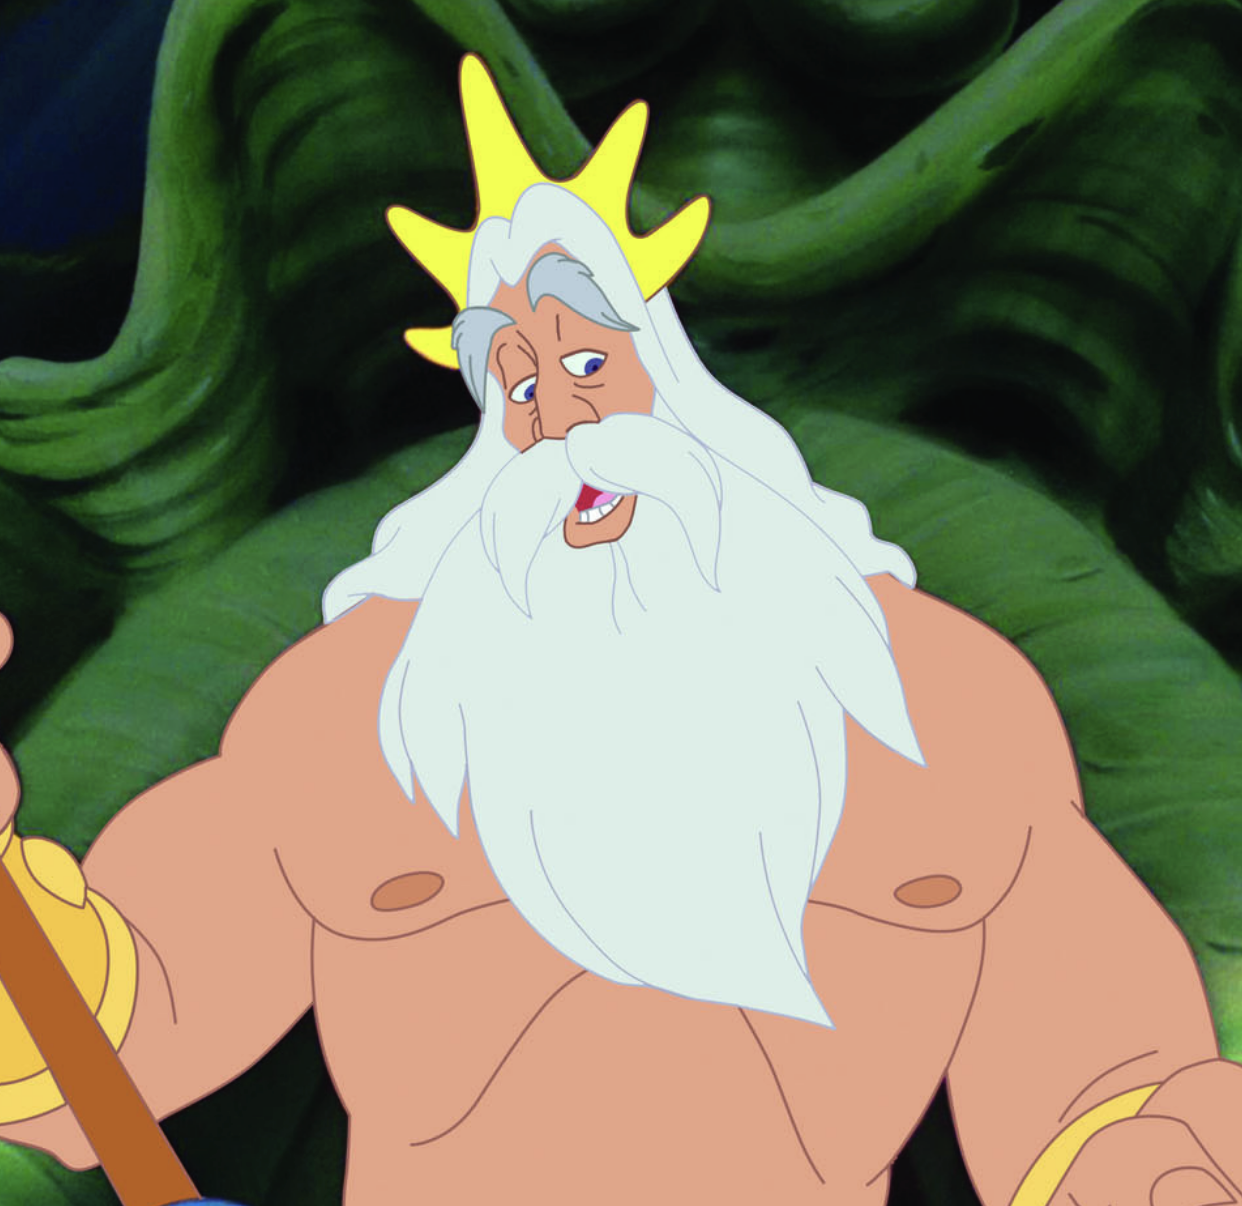 King Triton in his white beard and crown under the ocean